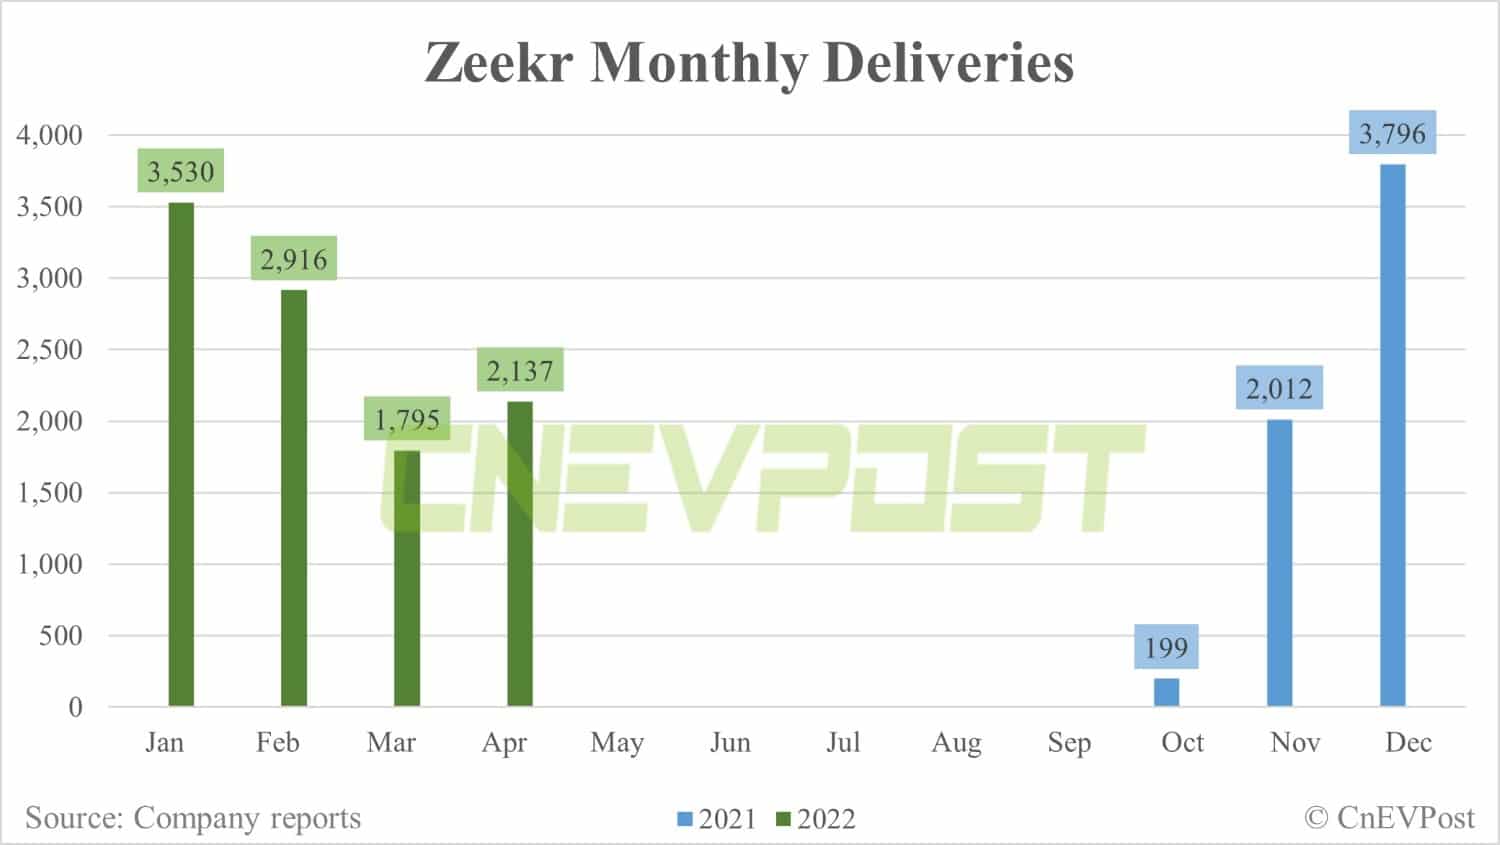 Zeekr further cuts car purchase benefits, blames raw material price hikes-CnEVPost